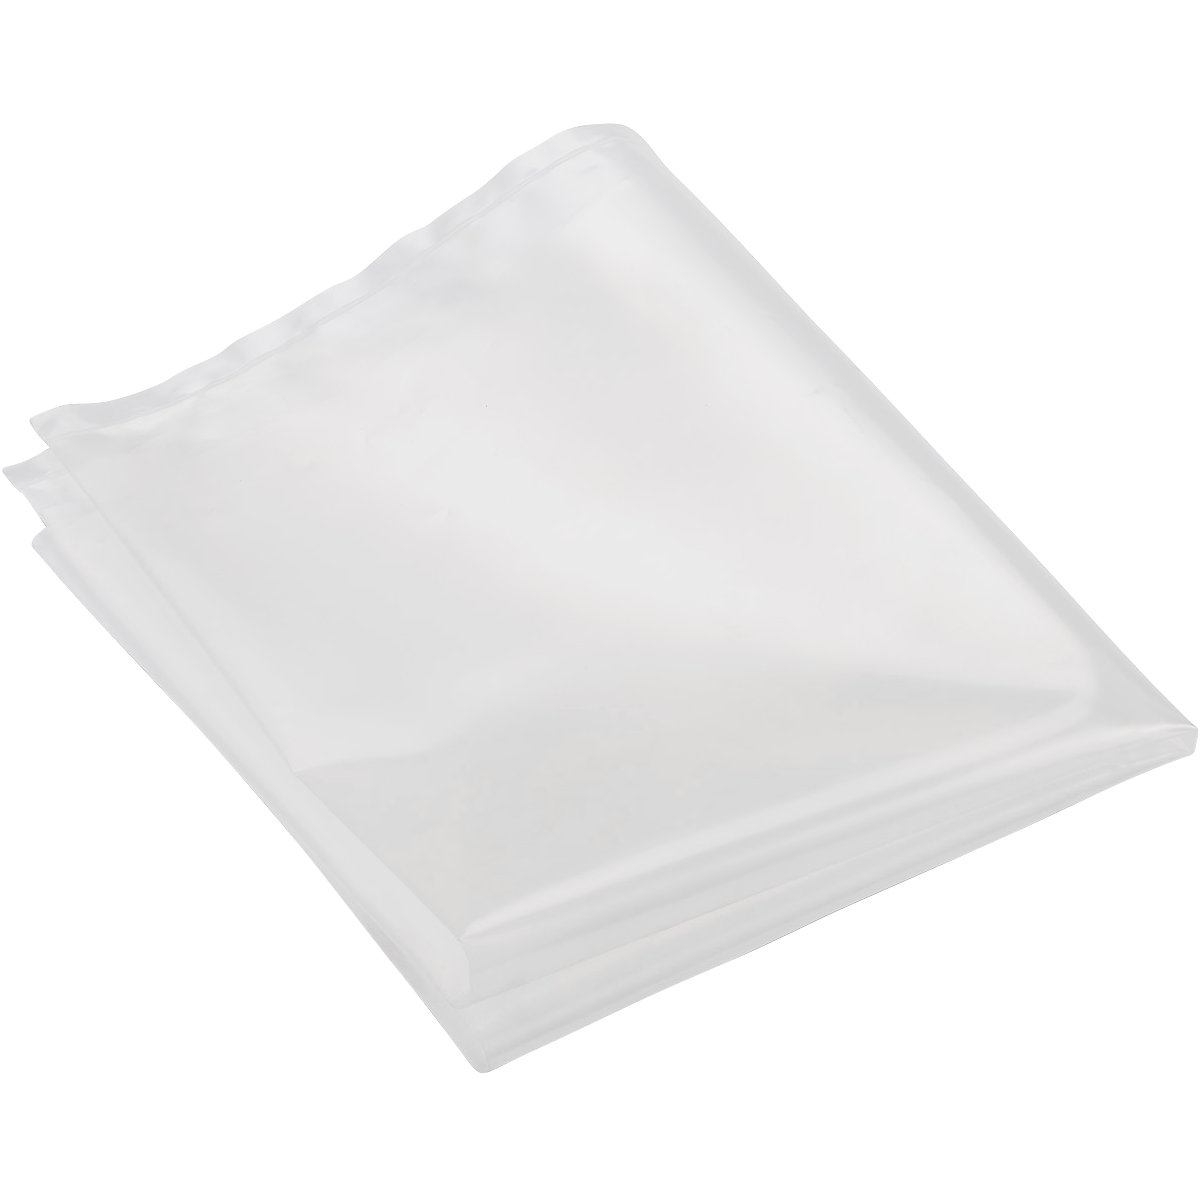 Plastic bag for individual rechargeable batteries - CEMO